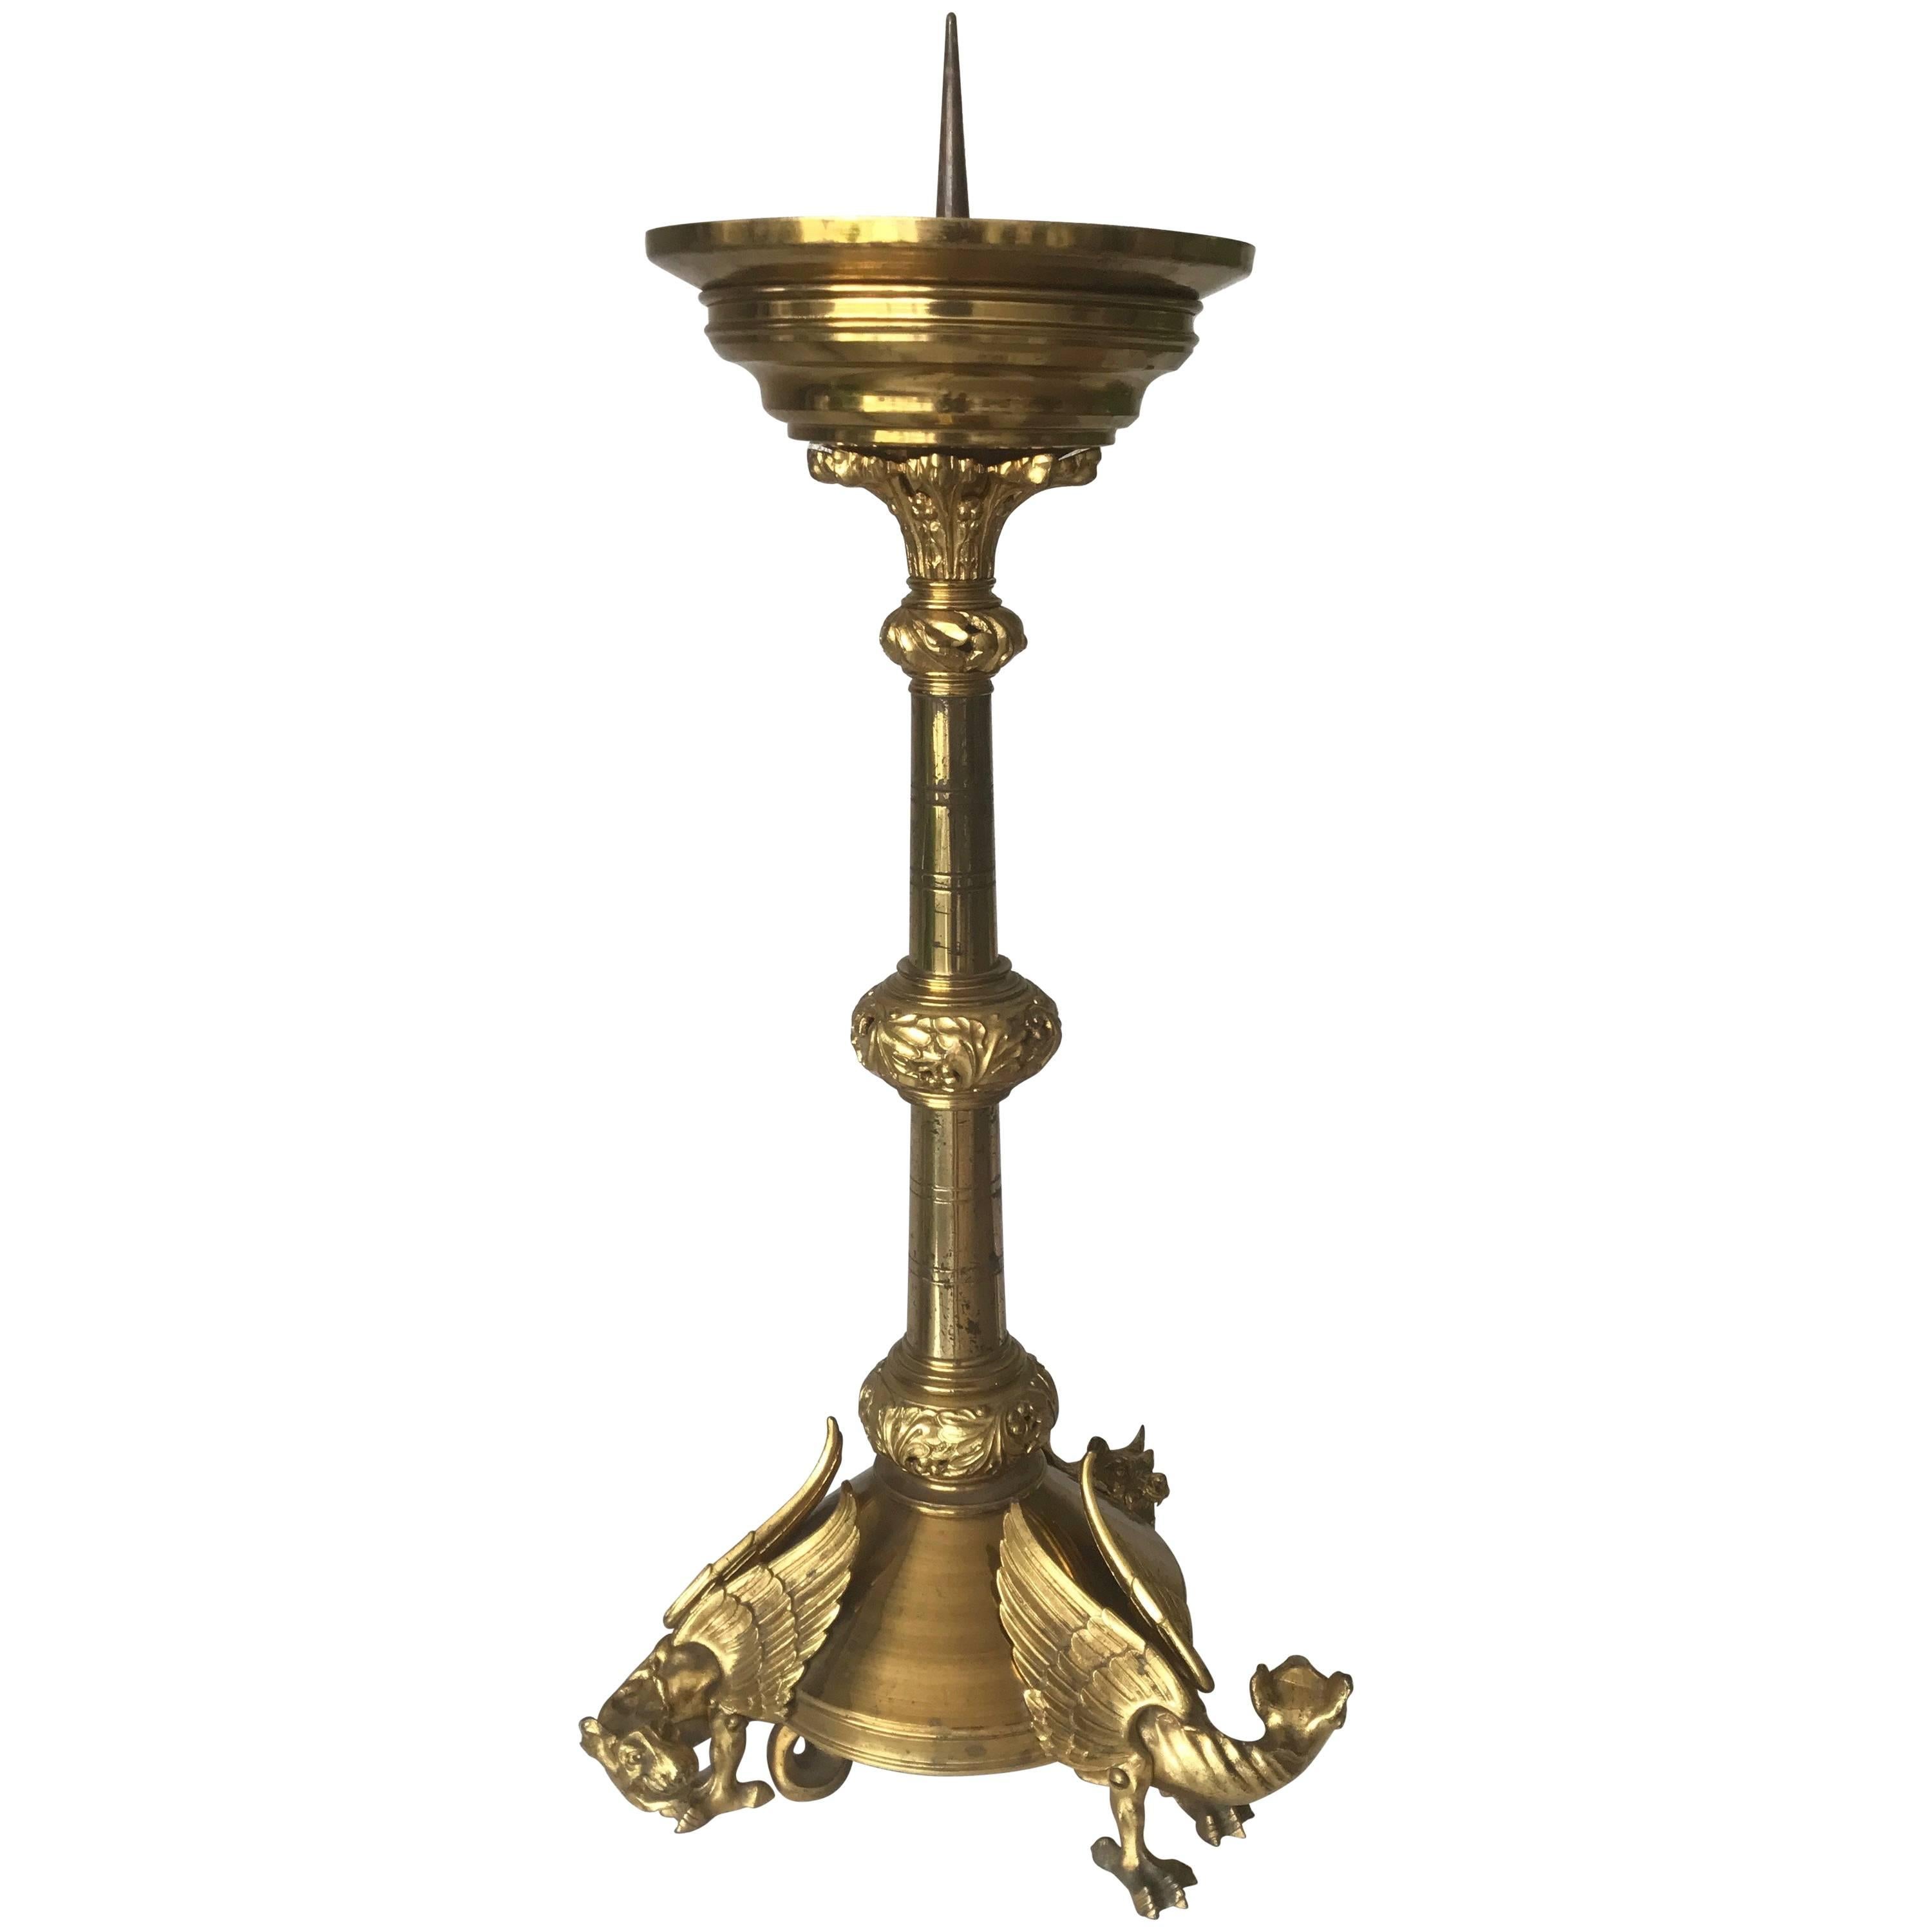 Impressive Gothic Revival Sizable Antique French Gilt Bronze Chimera Candlestick For Sale